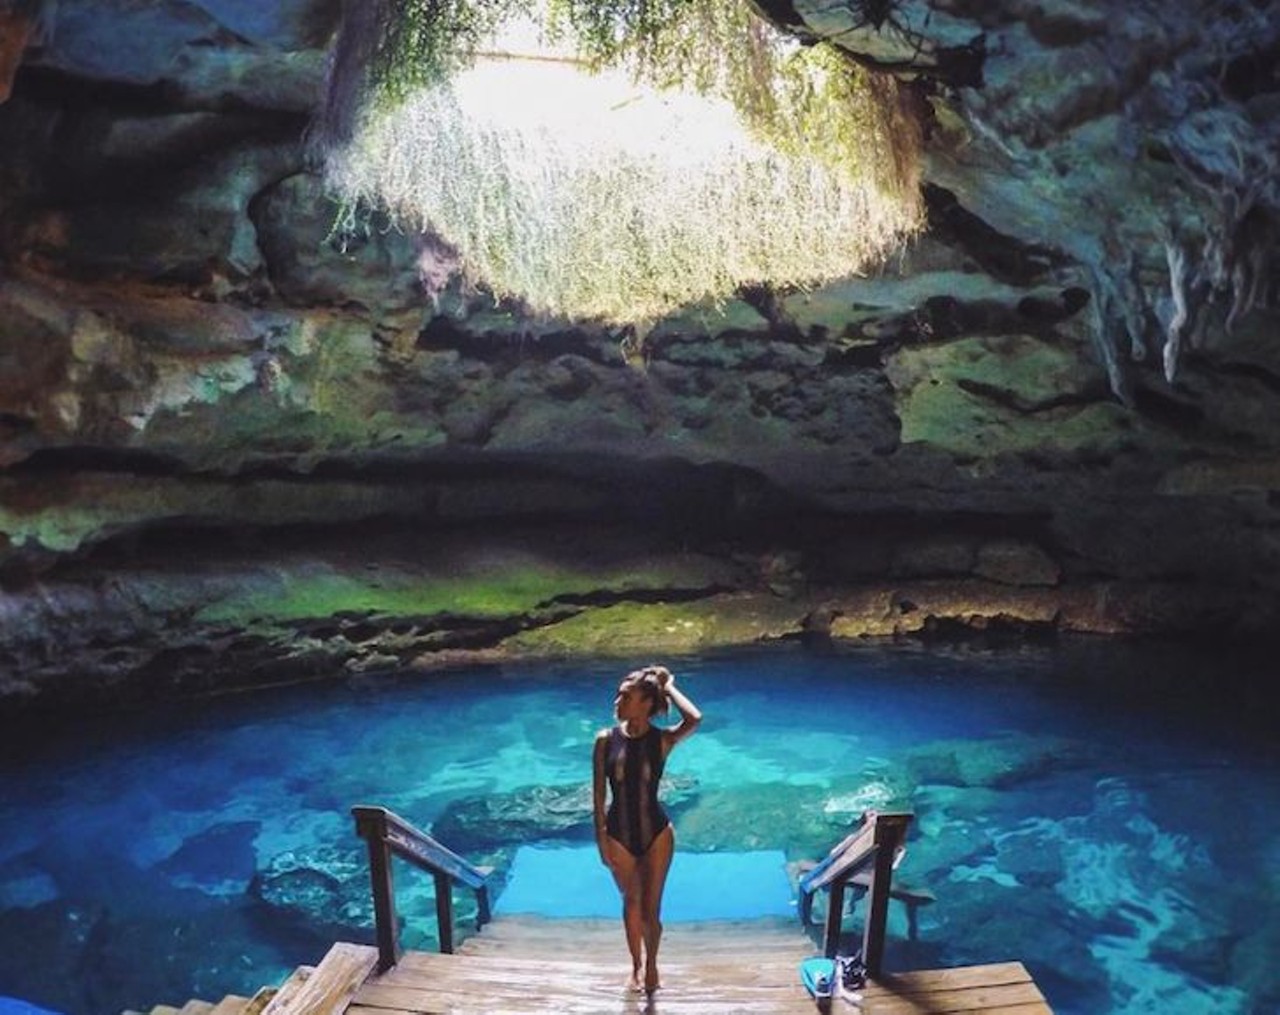 Devil&#146;s Den
5390 Northeast 180th Ave., Williston
1 hour, 30 minutes away
This underground spring is tucked inside a dry cave, complete with stalactites and fossil beds millions of years old. Regular swimming is prohibited, but you&#146;re free to snorkel your way around the rocky cavern. 
Photo via sabrinahorel/Instagram